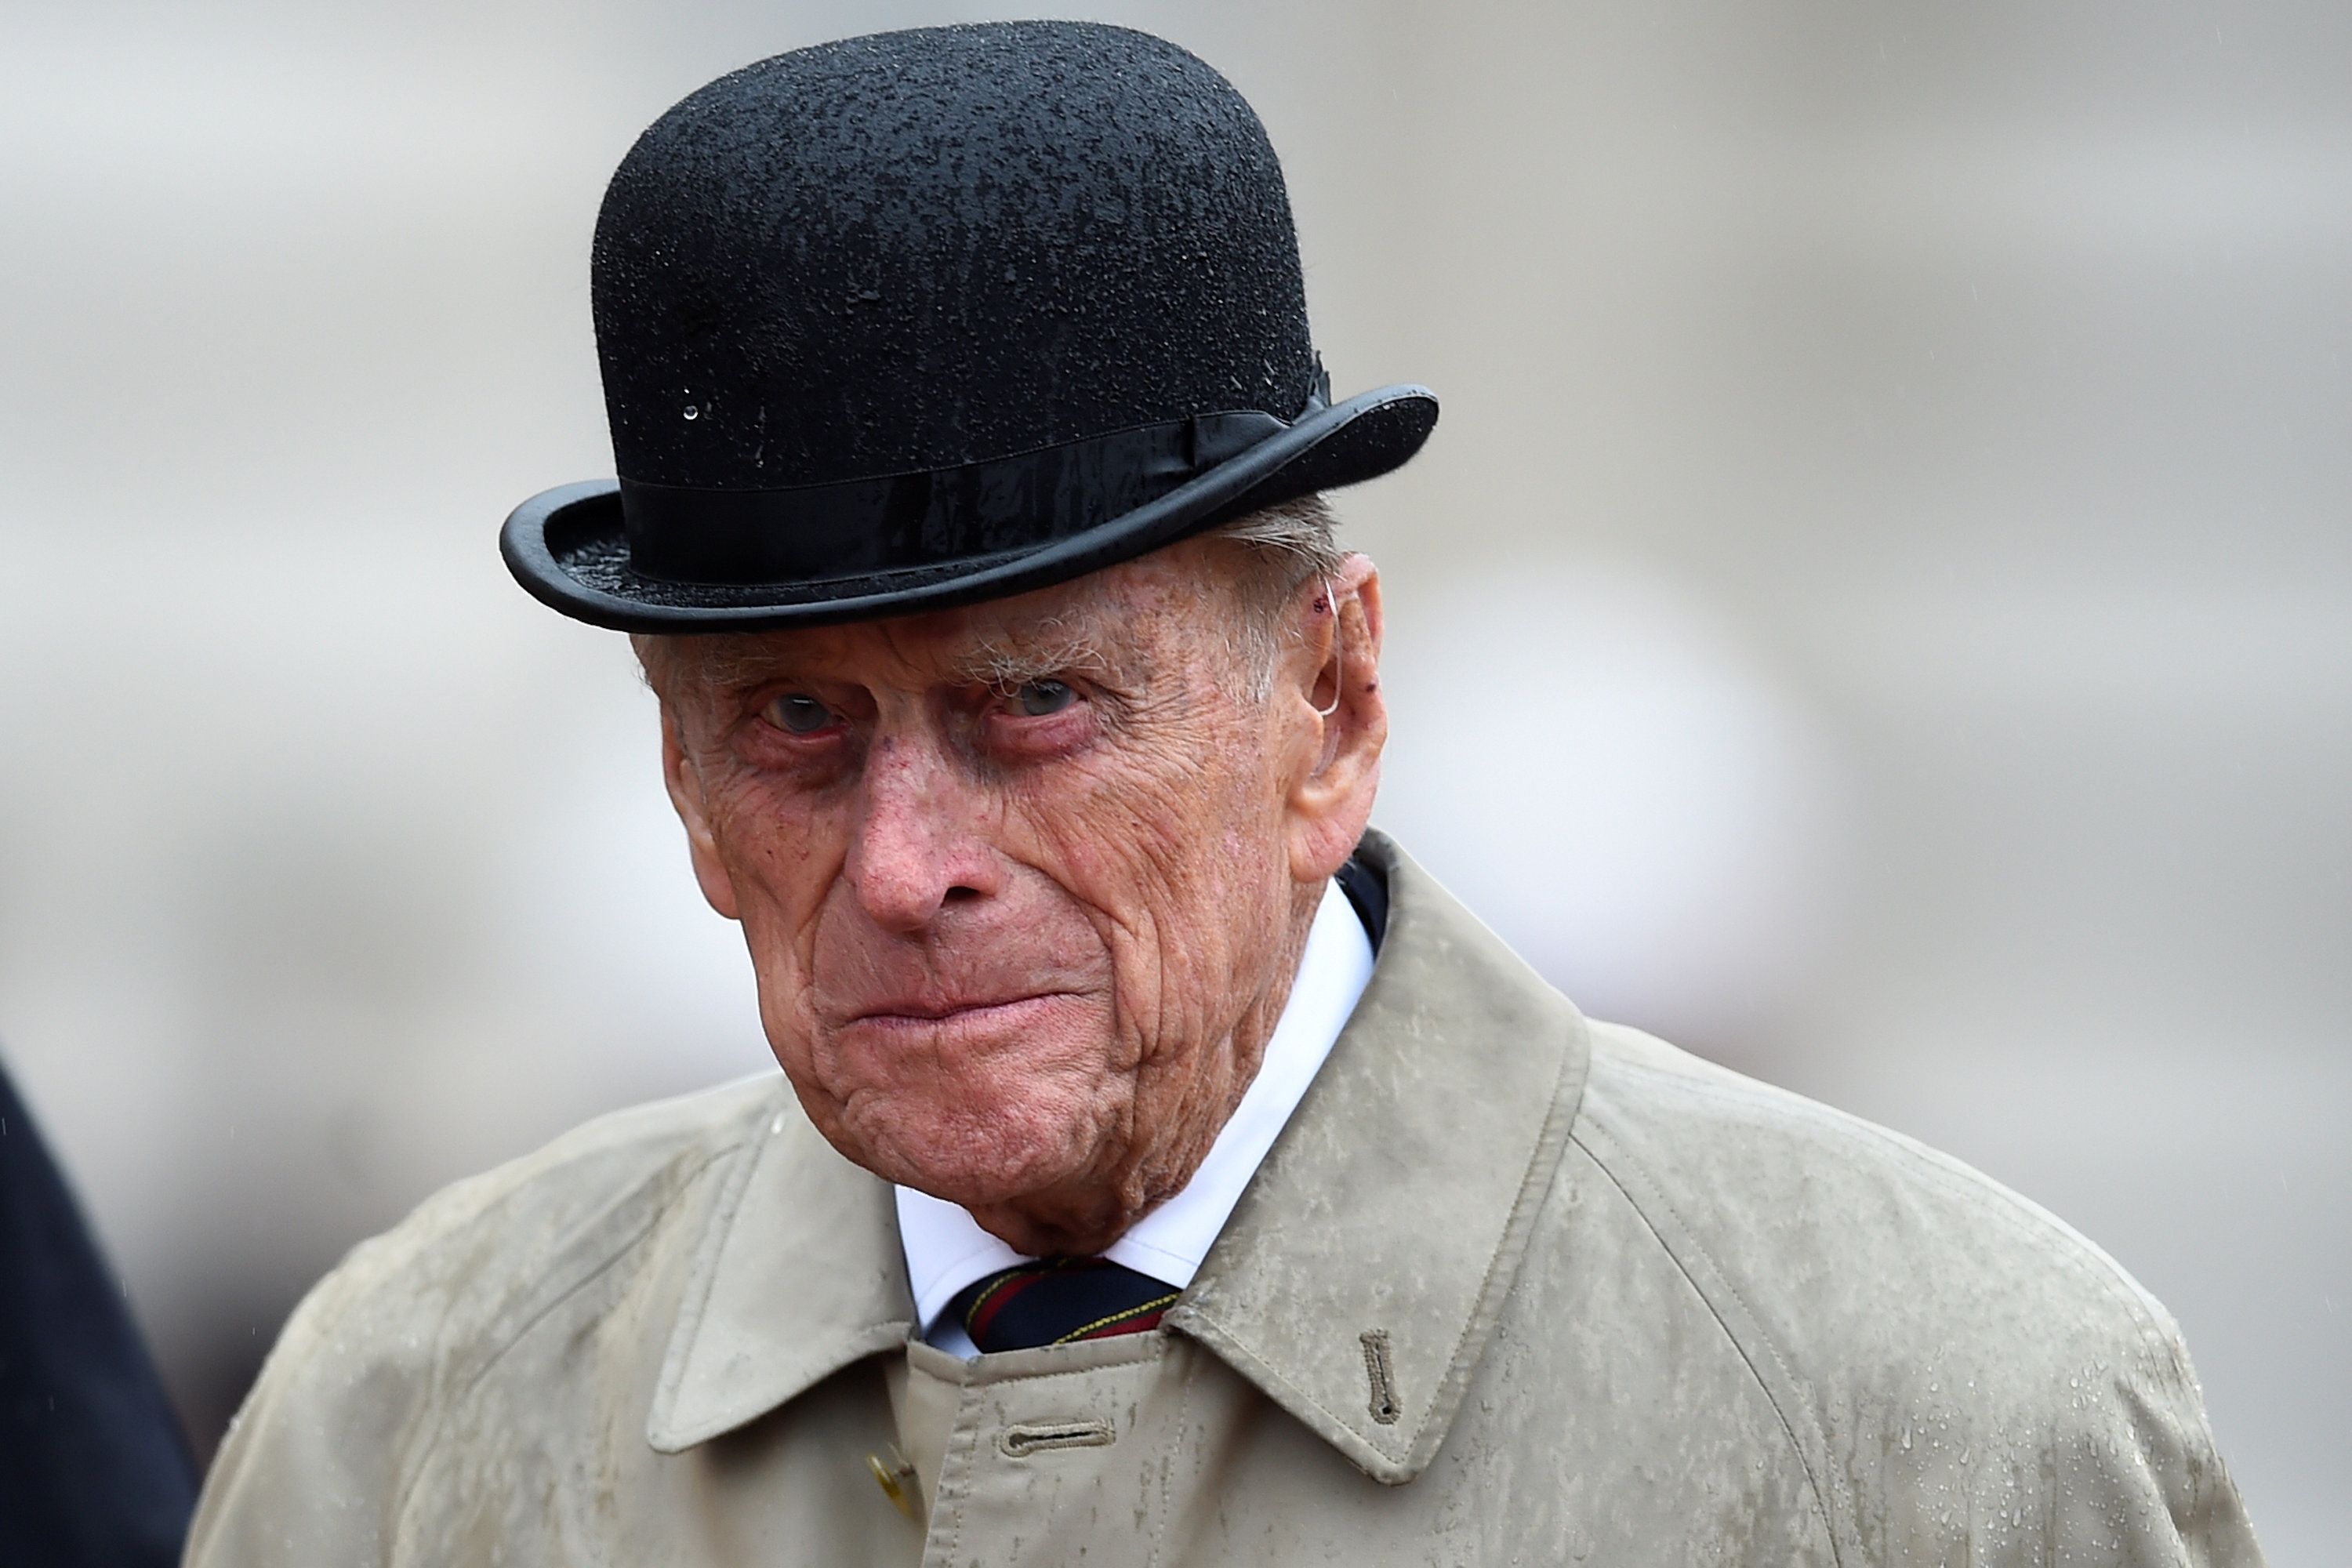 prince Philip, Duke of Edinburgh as Captain General, Royal Marines, making his final individual public engagement while attending a parade to mark the finale of the 1664 Global Challenge on the Buckingham Palace Forecourt in London, England | Photo: Getty Images